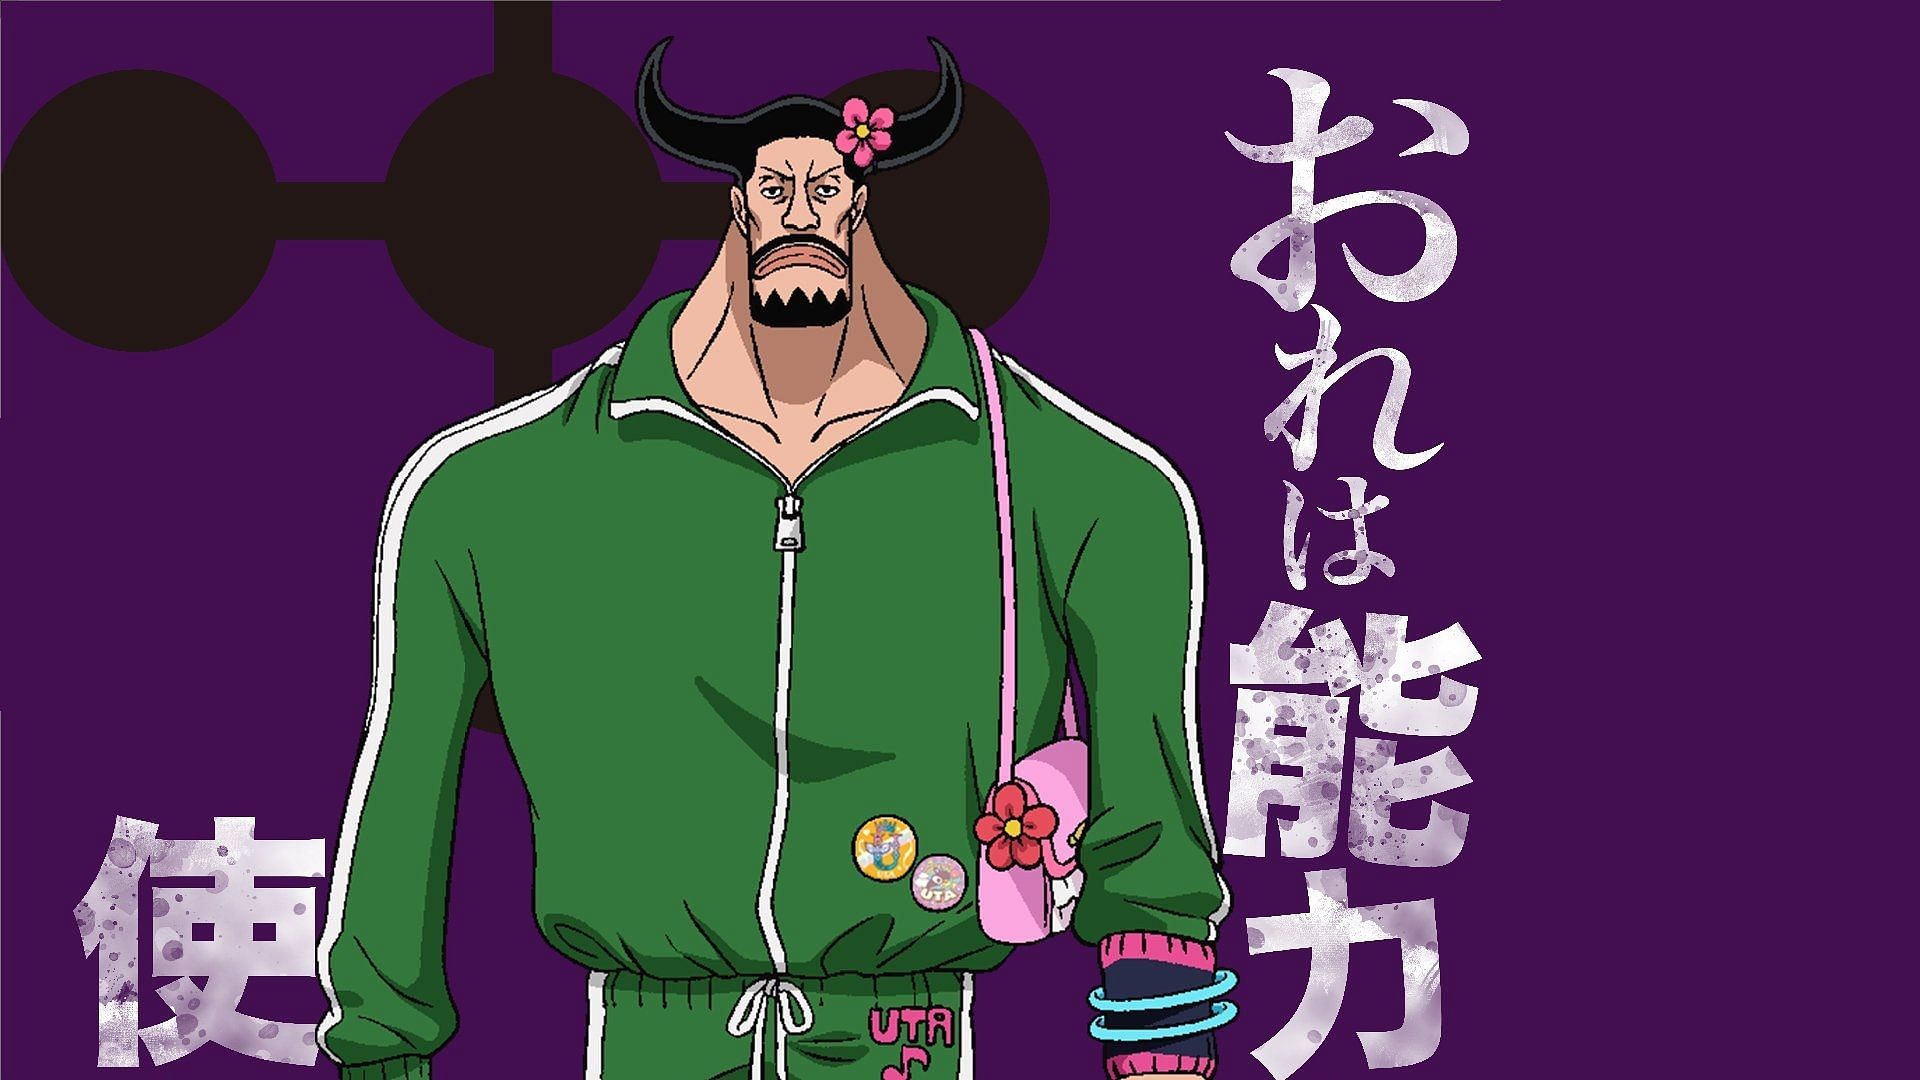 Blueno reappeared in One Piece: Red as a CP0 agent (Image via Toei Animation, One Piece)